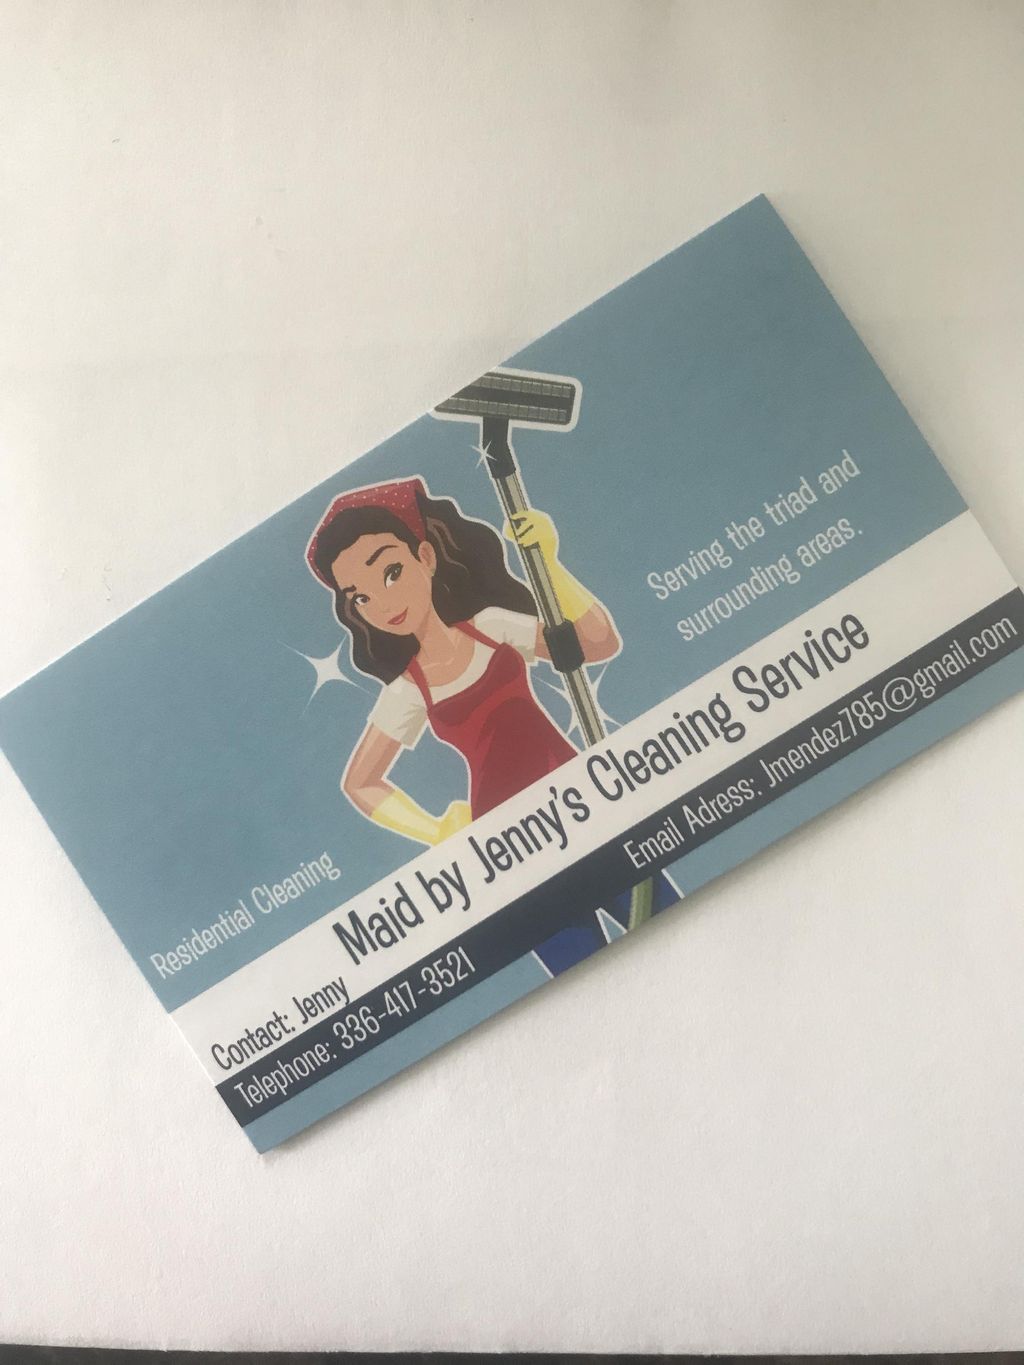 Maid by Jenny's Cleaning Service